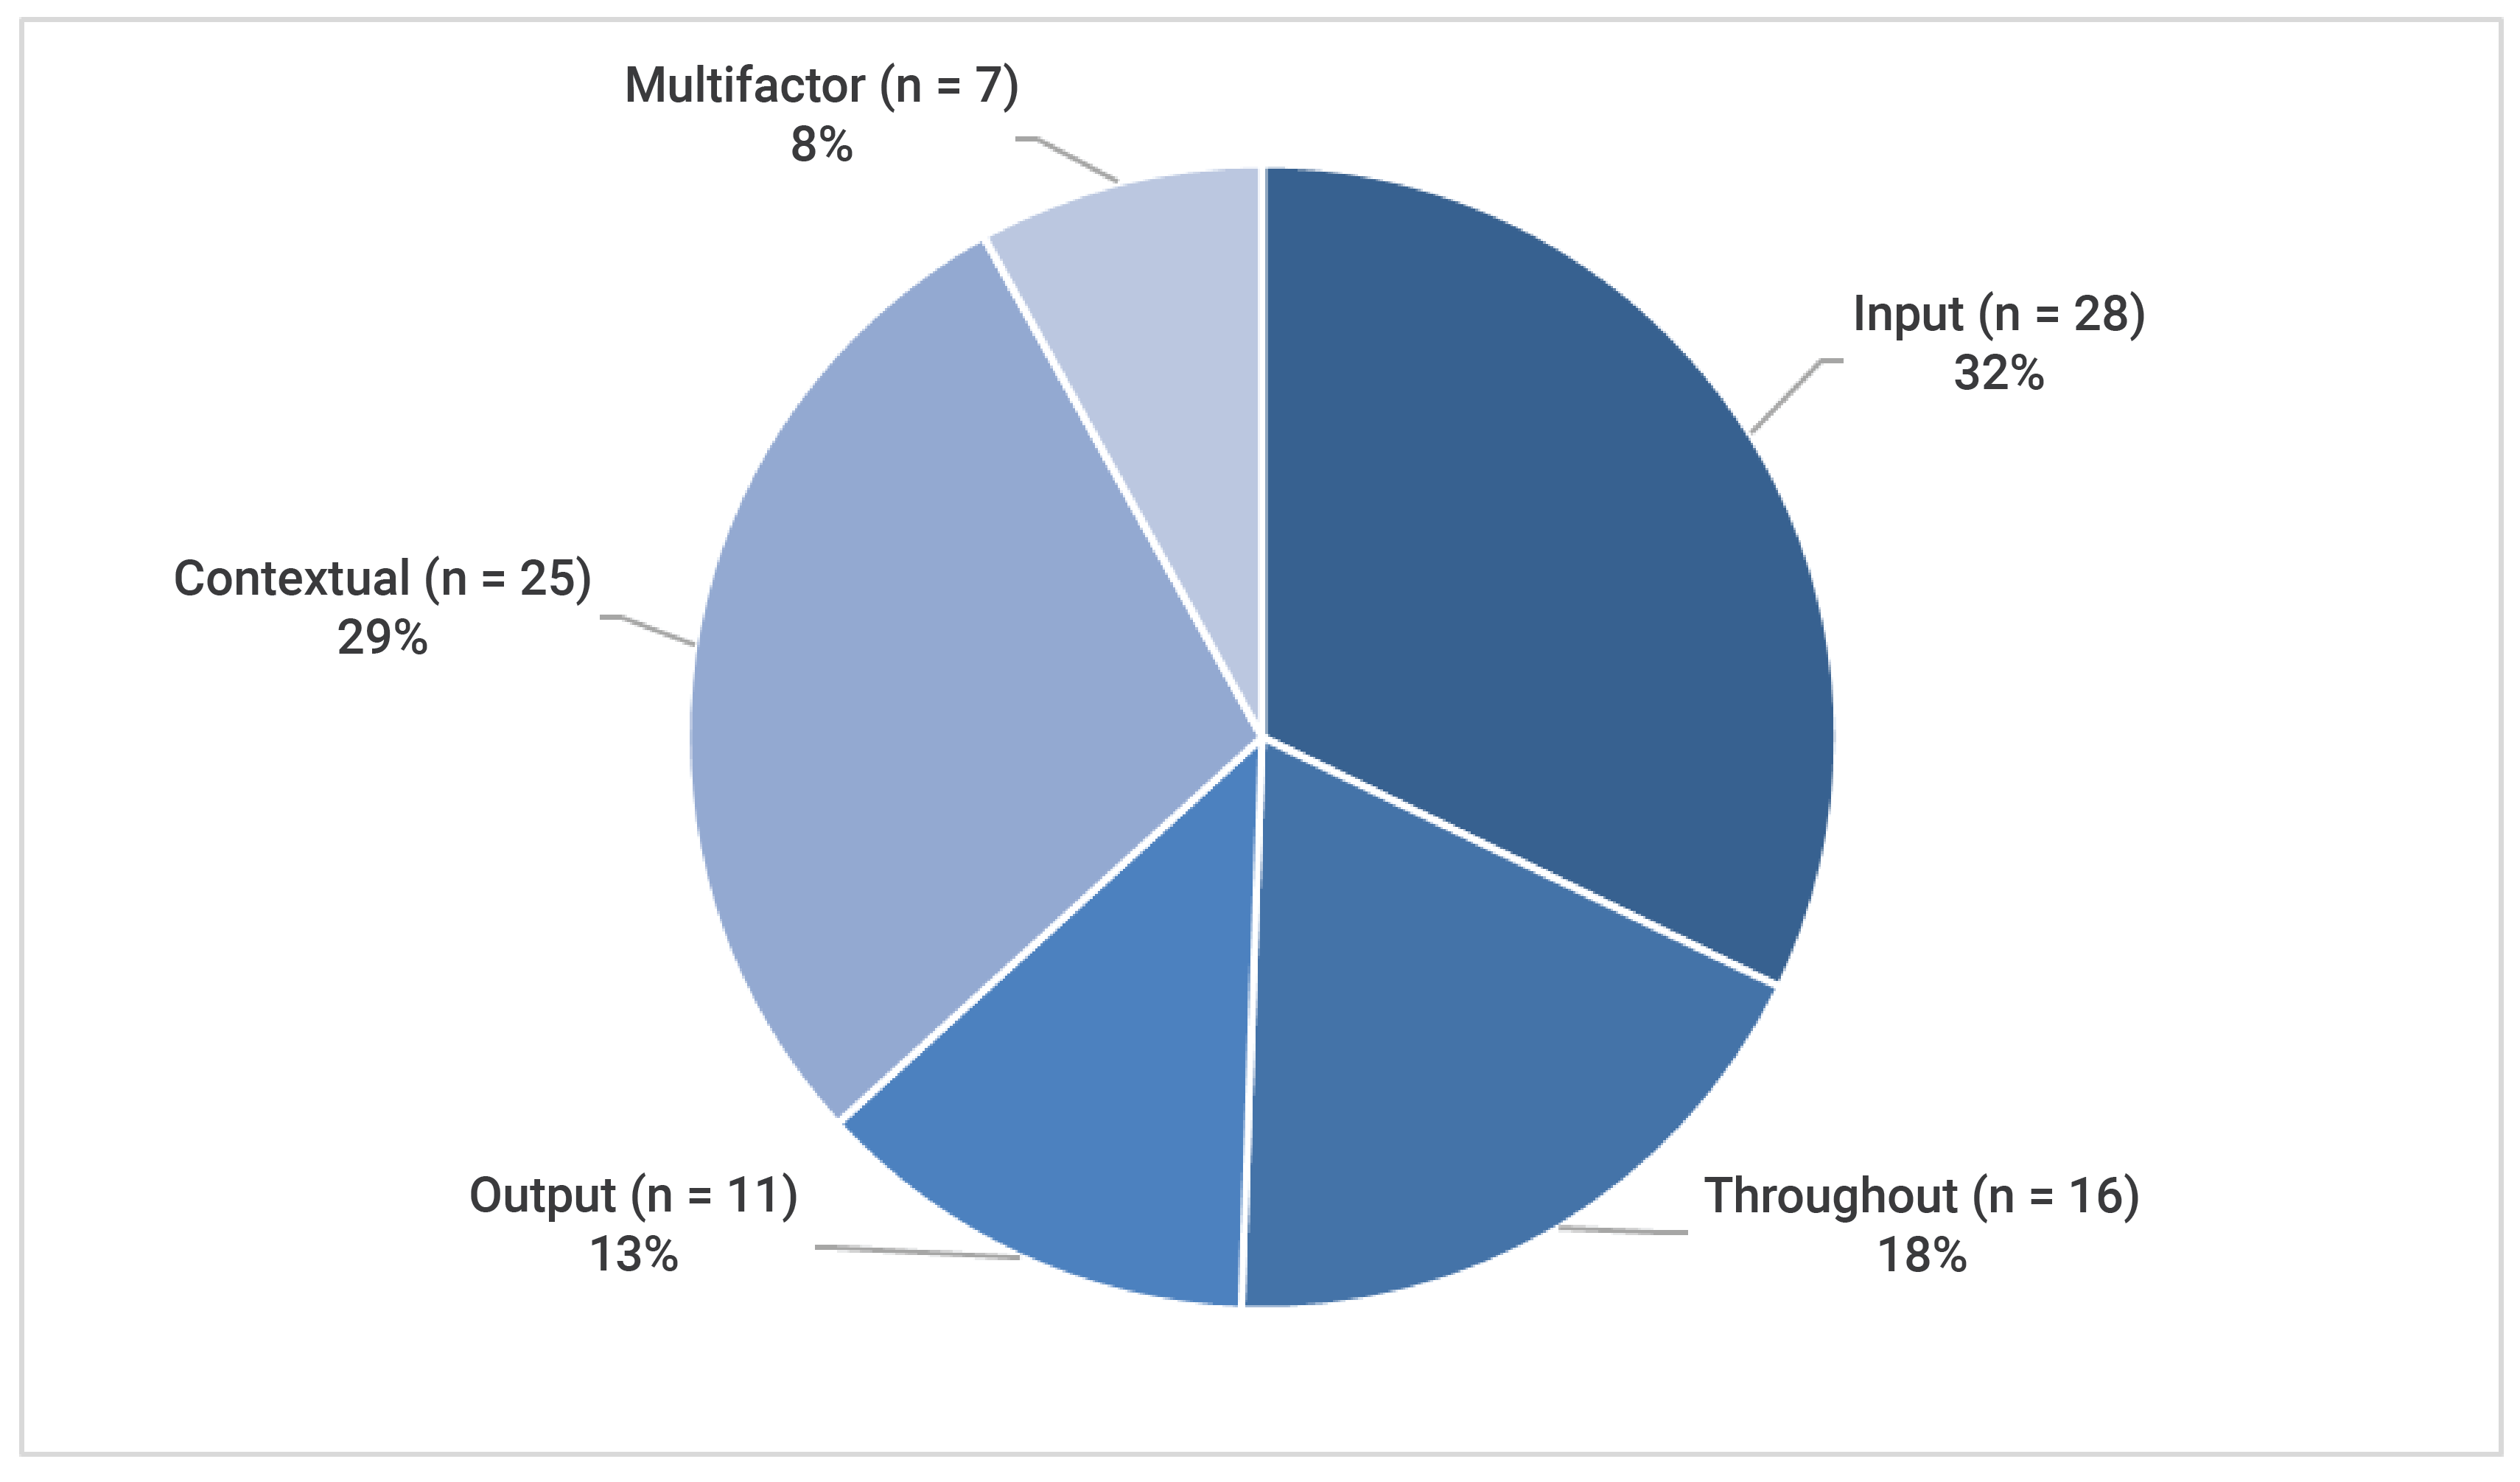 A pie chart showing the percentage of new and emerging interventions intended to alleviate emergency department overcrowding presented by broad contributing factors. Moving clockwise from the top of the figure, 28 interventions (32%) addressed an input factor, 16 interventions (18%) addressed a throughput factor, 11 interventions (13%) addressed an output factor, 25 interventions (29%) addressed a contextual factor, and 7 interventions (8%) addressed multiple factors contributing to emergency department overcrowding.